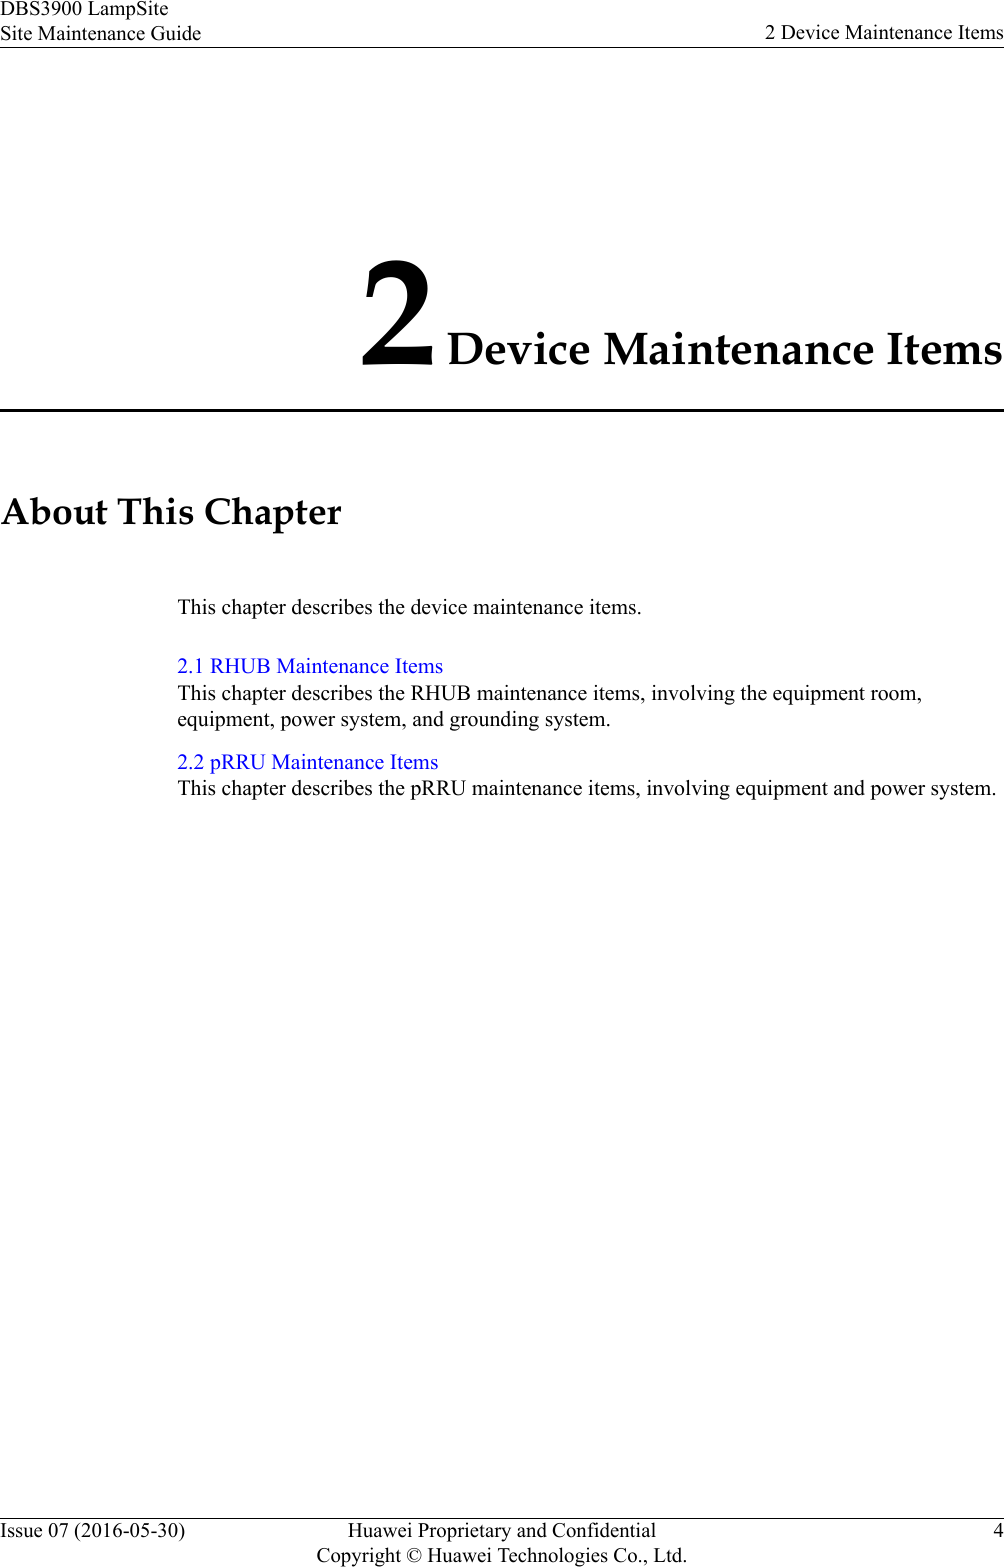 2 Device Maintenance ItemsAbout This ChapterThis chapter describes the device maintenance items.2.1 RHUB Maintenance ItemsThis chapter describes the RHUB maintenance items, involving the equipment room,equipment, power system, and grounding system.2.2 pRRU Maintenance ItemsThis chapter describes the pRRU maintenance items, involving equipment and power system.DBS3900 LampSiteSite Maintenance Guide 2 Device Maintenance ItemsIssue 07 (2016-05-30) Huawei Proprietary and ConfidentialCopyright © Huawei Technologies Co., Ltd.4